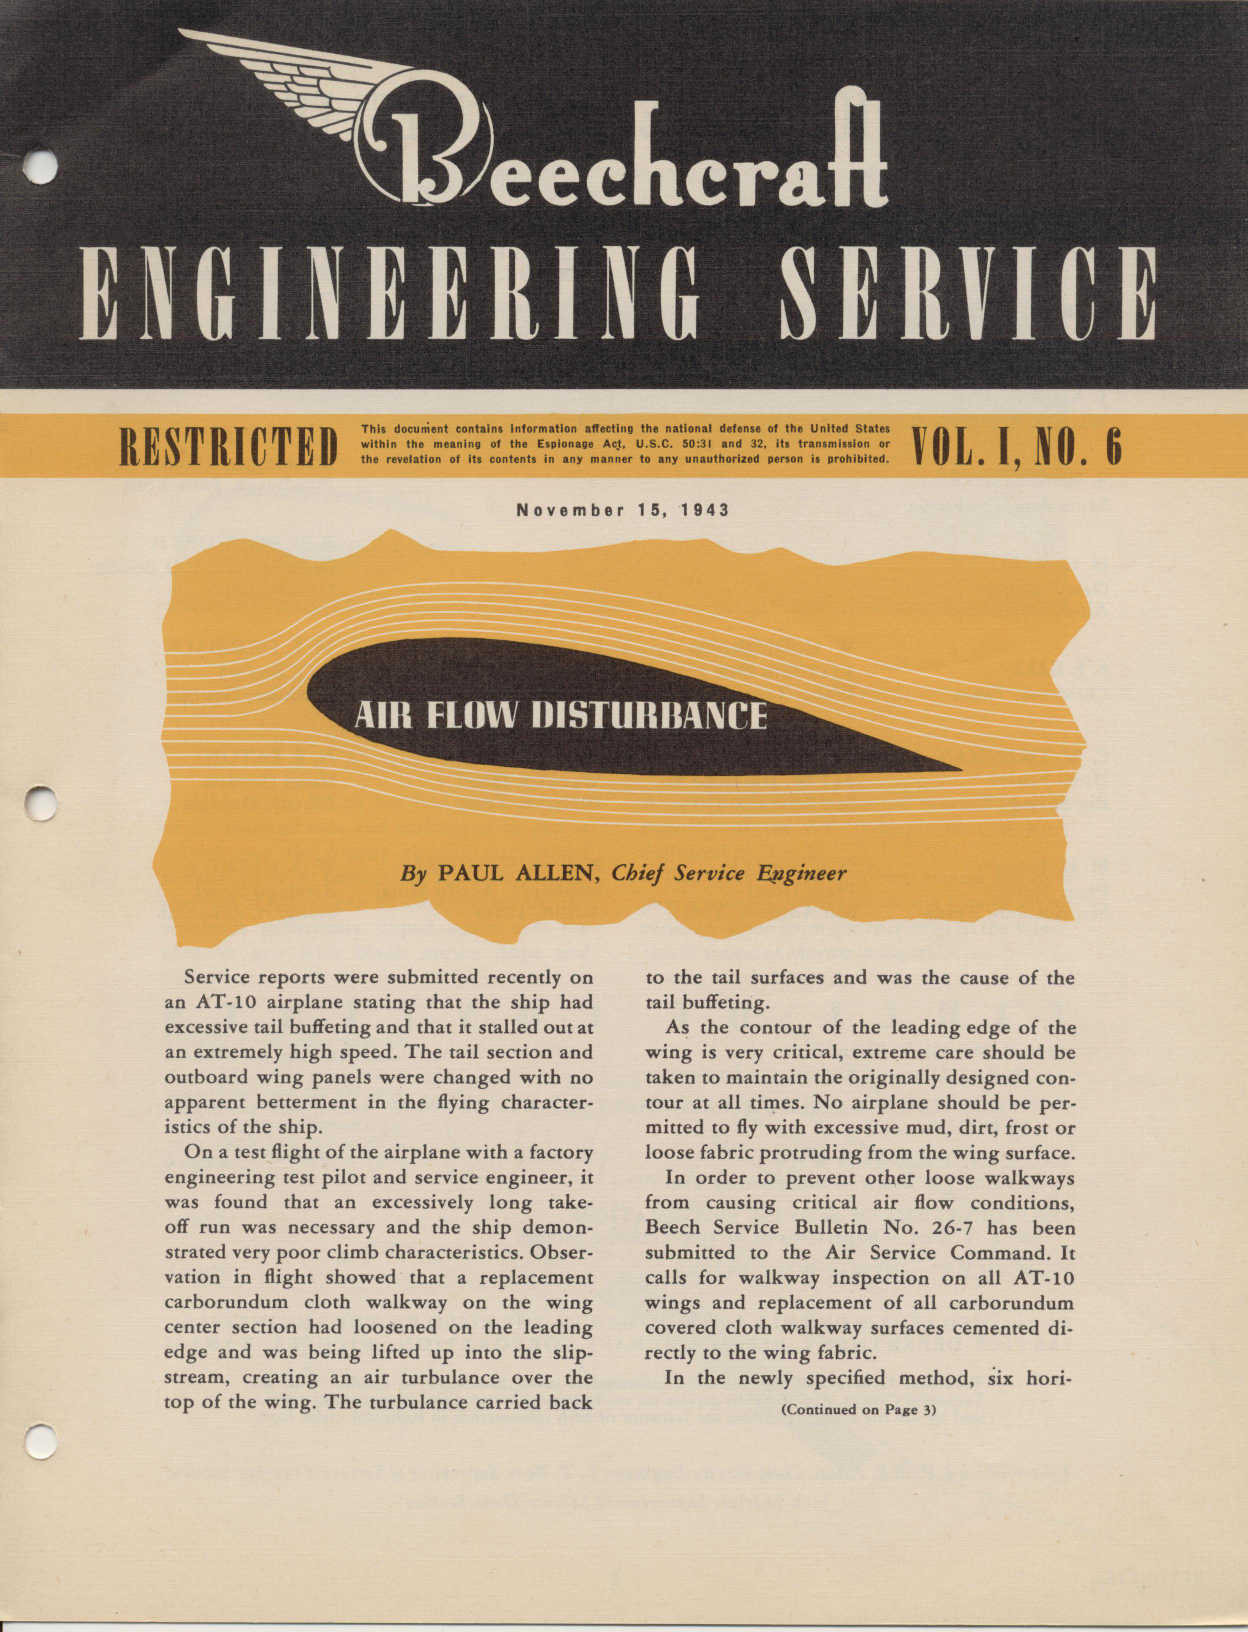 Sample page 1 from AirCorps Library document: Vol. I, No. 6 - Beechcraft Engineering Service